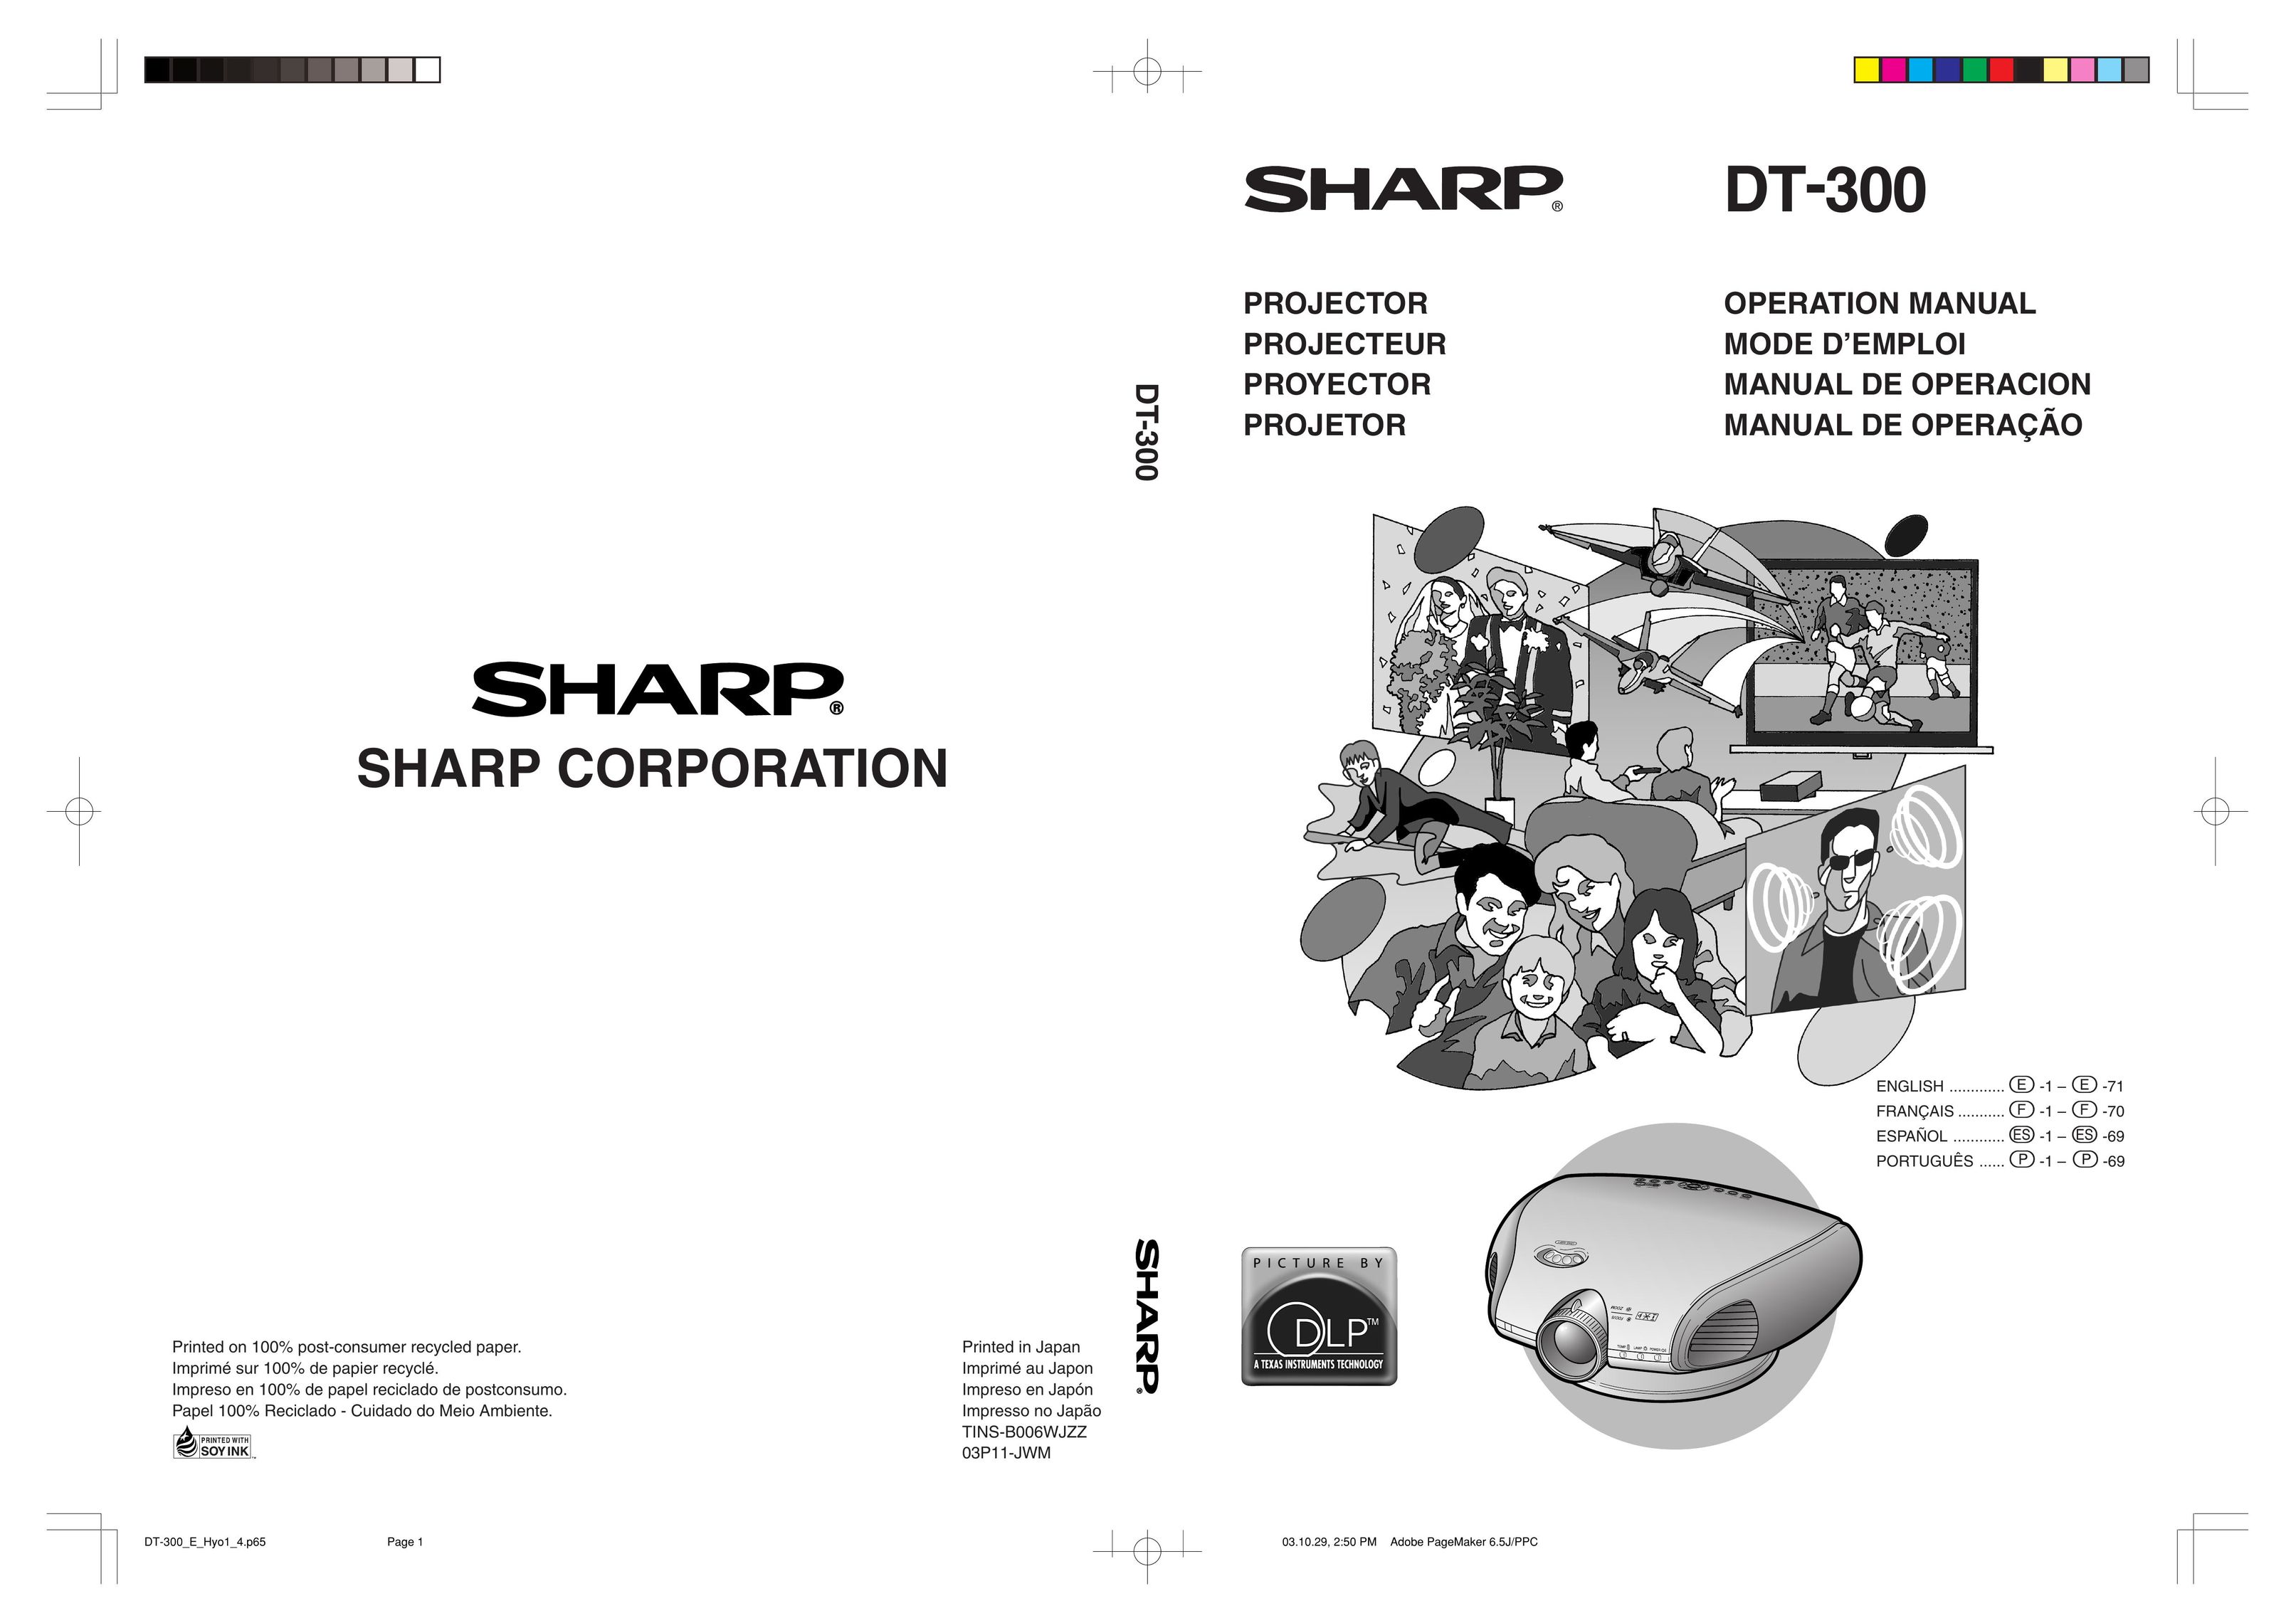 Sharp DT-300 Projector Accessories User Manual